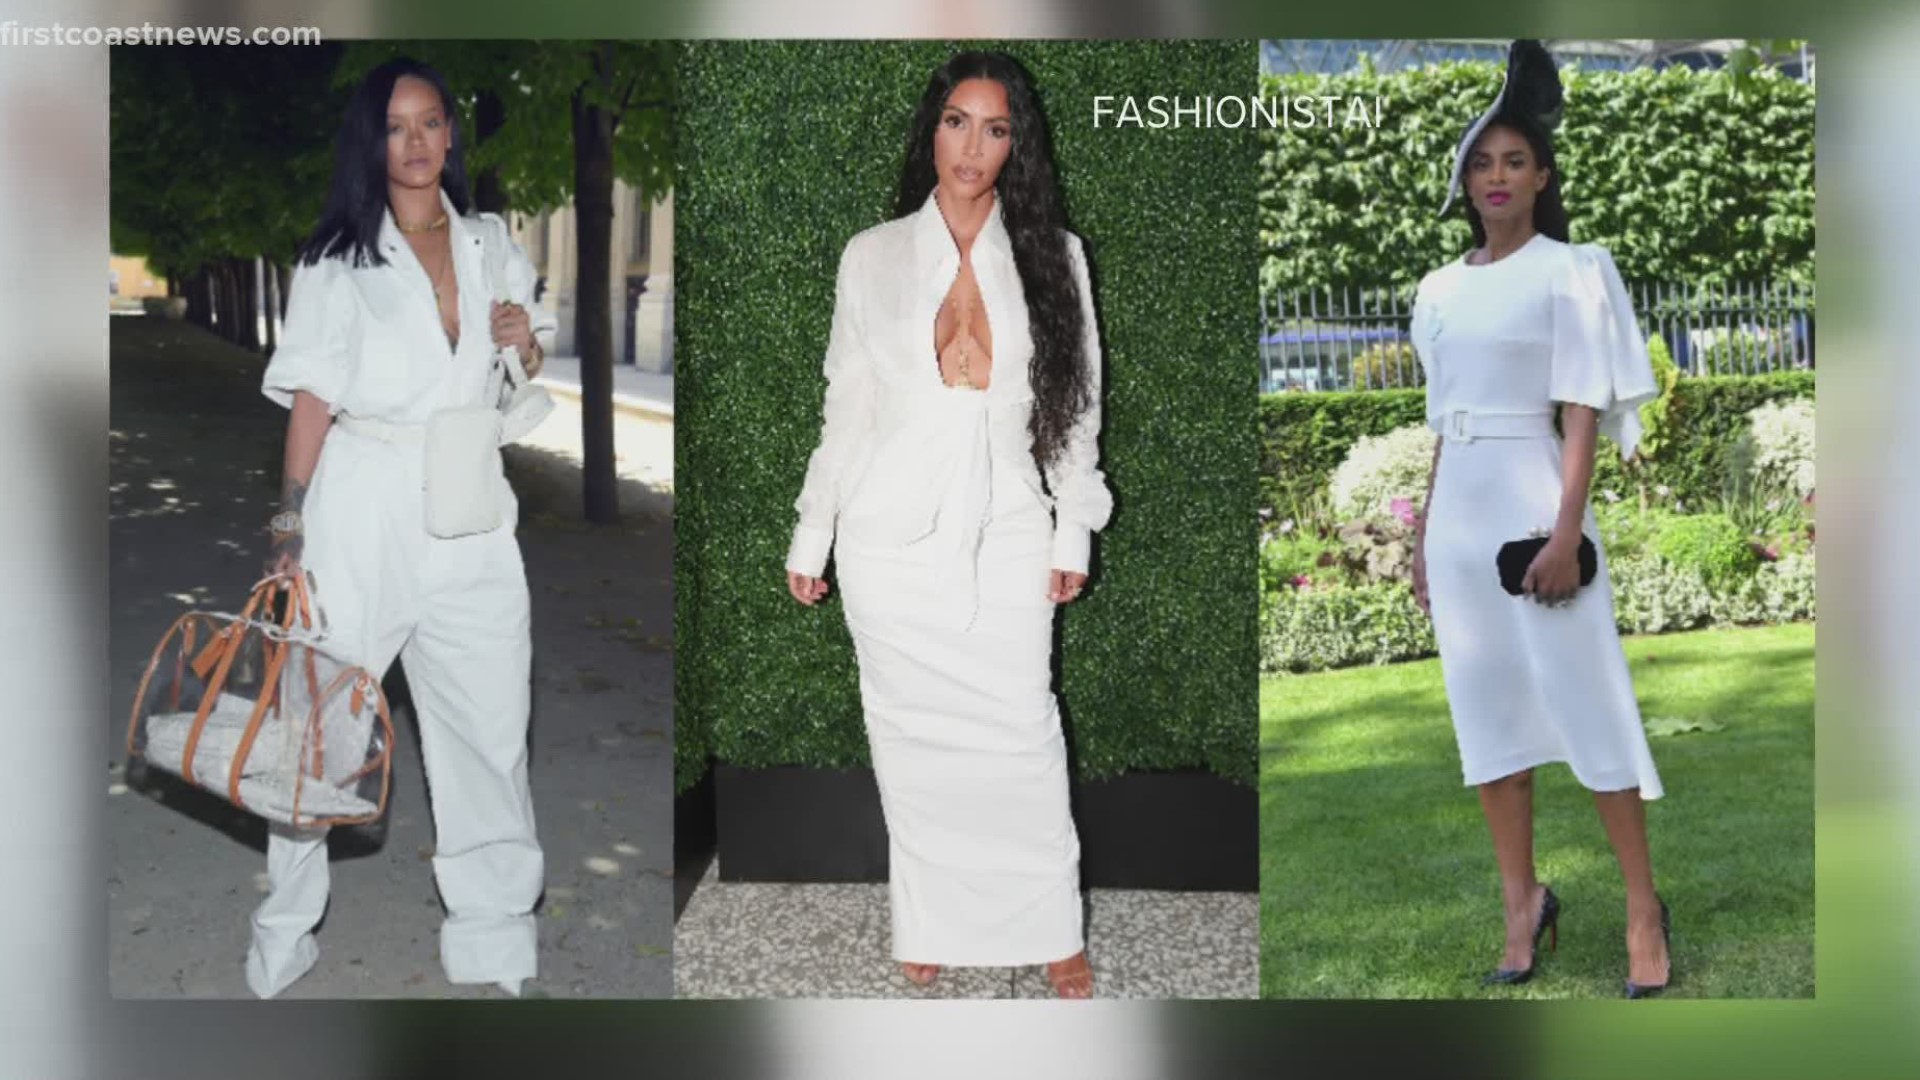 The Buzz: Yes, it's okay to wear white after Labor Day, fashion experts say